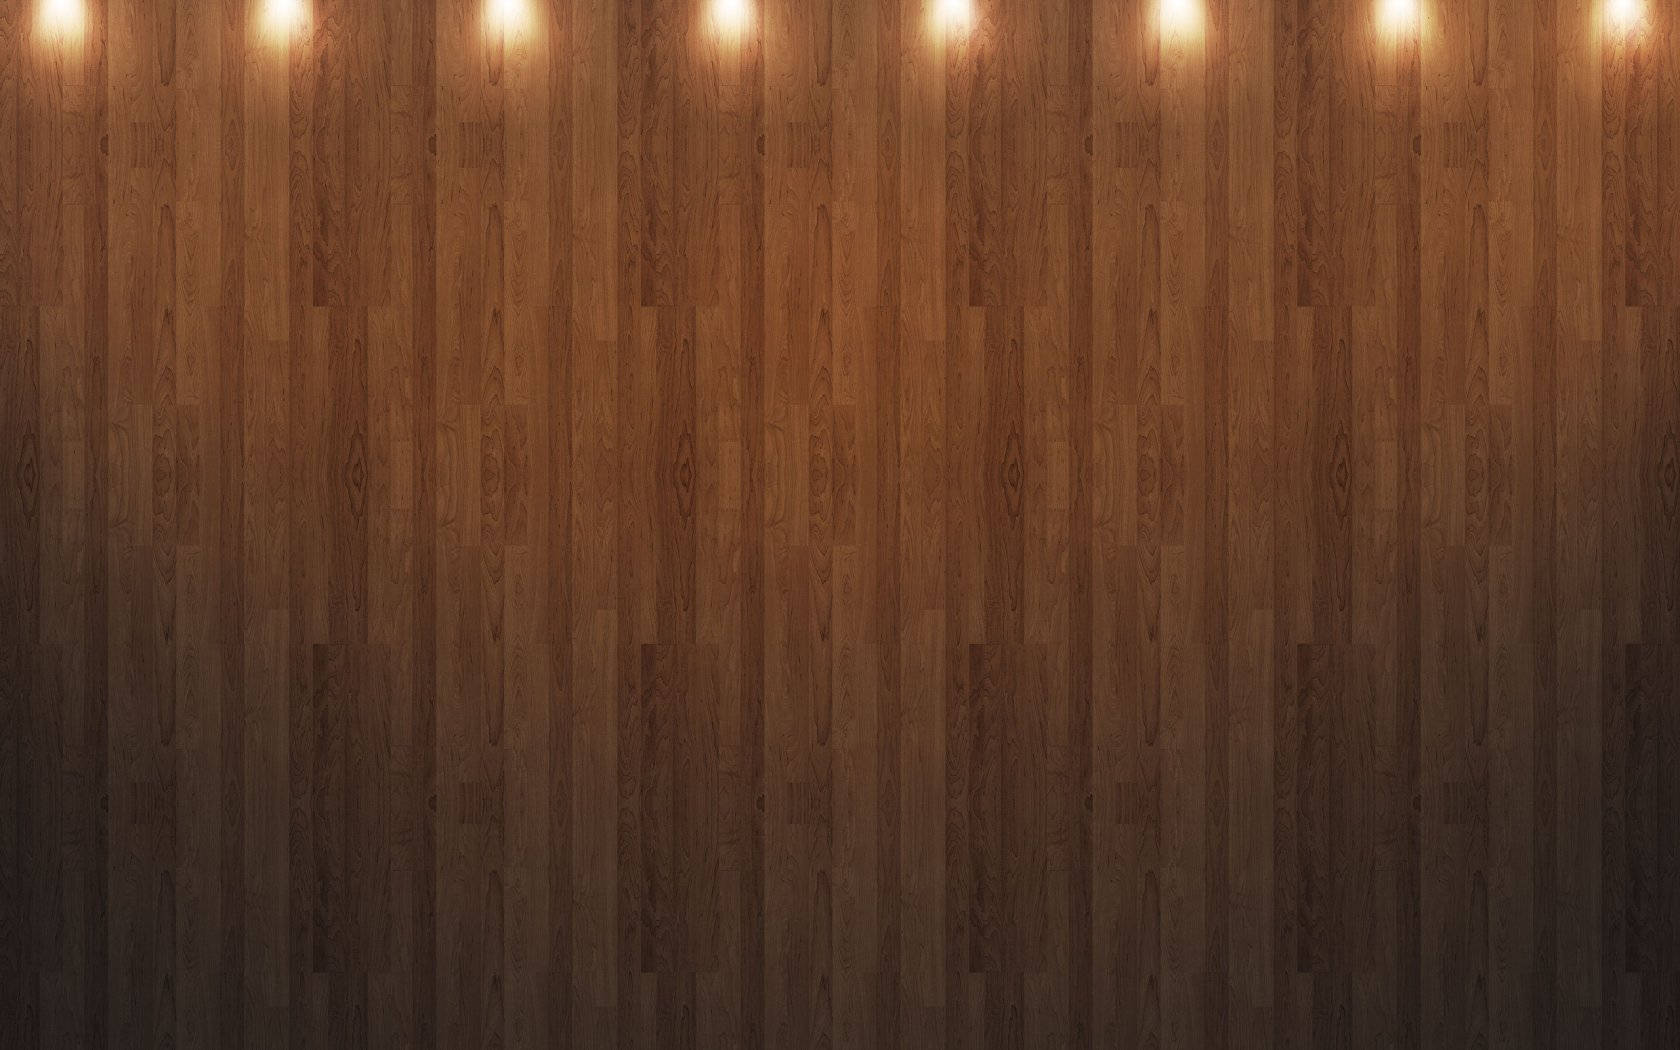 Hd Wood With Fairy Lights Wallpaper